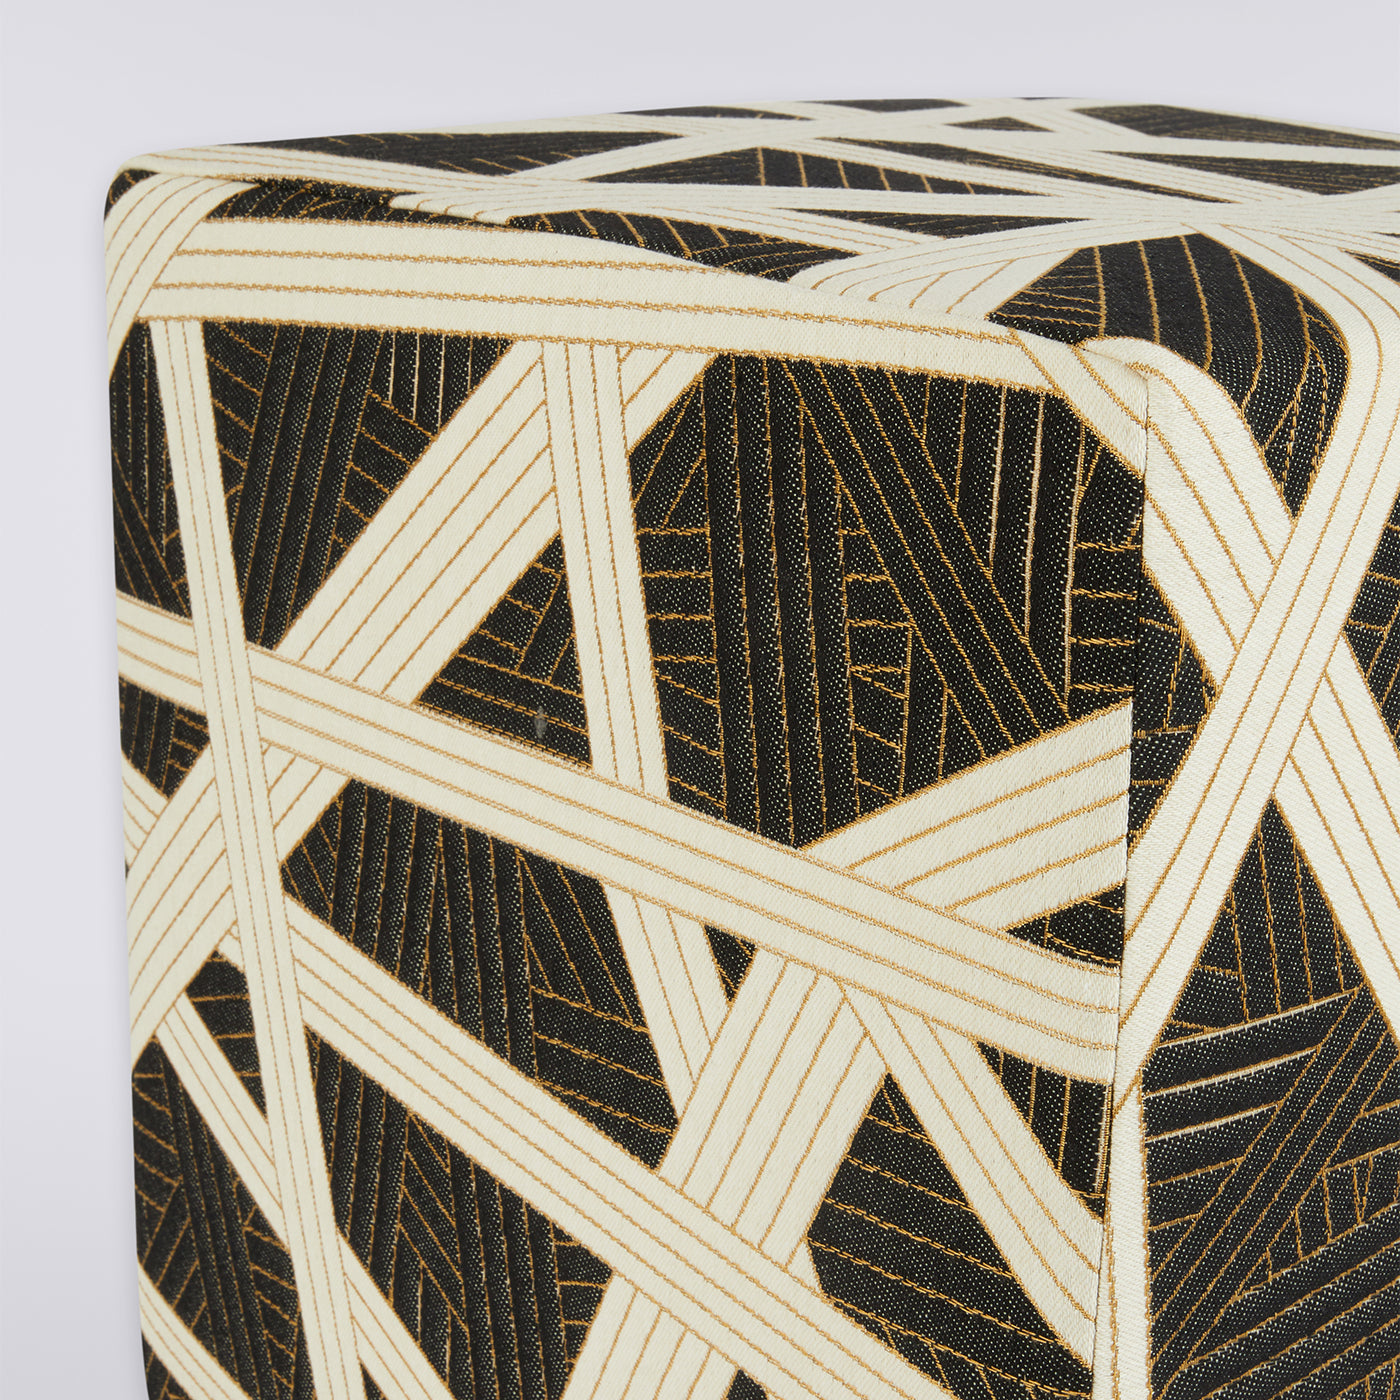 Nastri Cubic Black and Gold Stitching Pouf - Alternative view 1